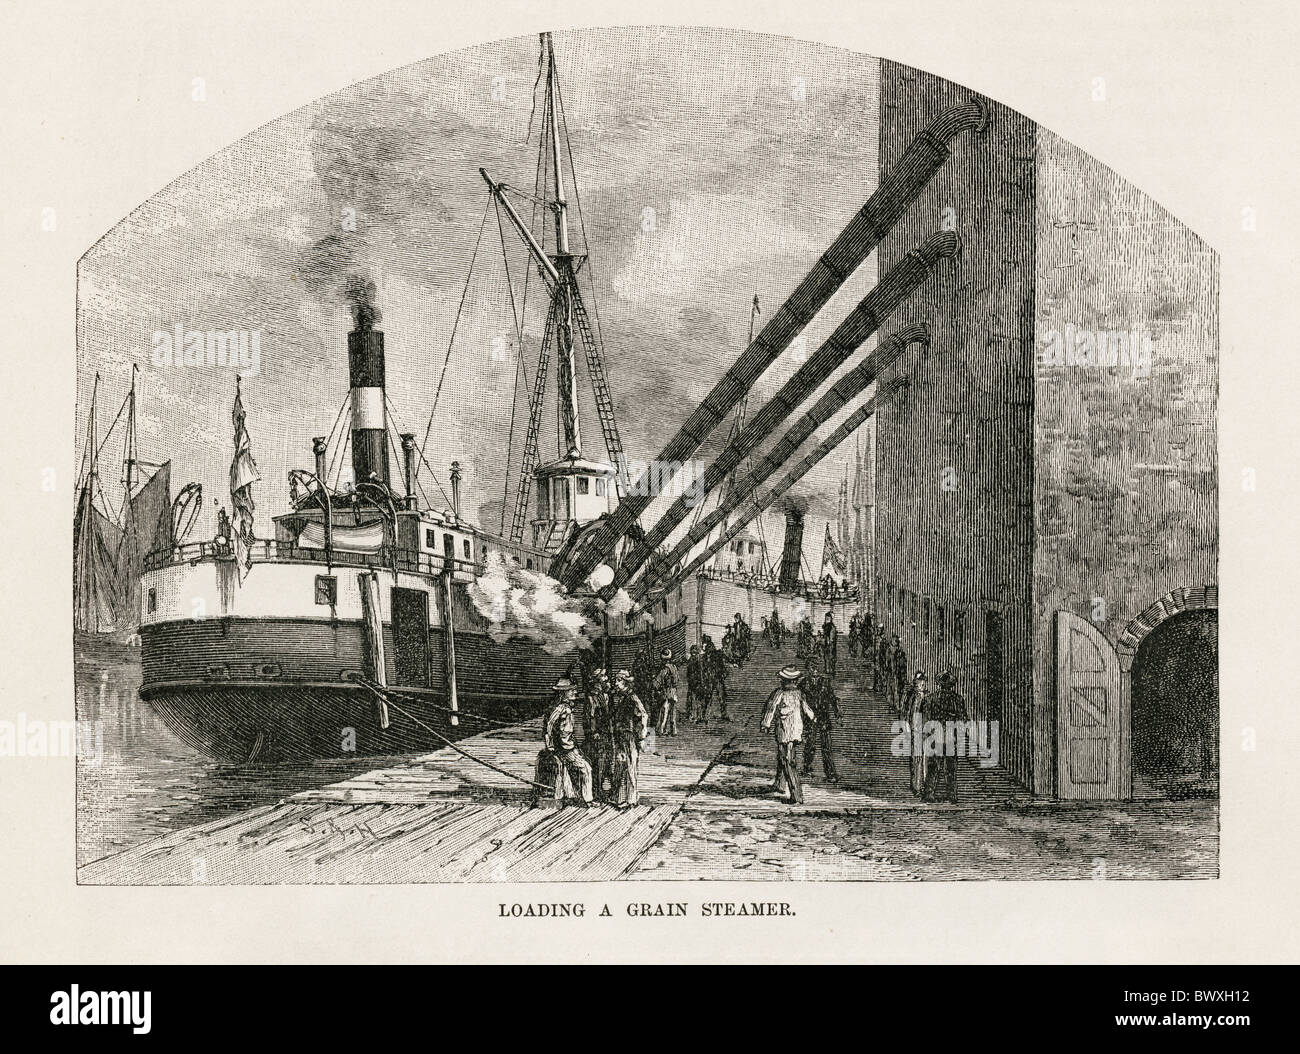 'Loading a grain steamer'. Milwaukee, Wisconsin. Originally published in April 1881 edition of Harper's New Monthly Magazine. Stock Photo